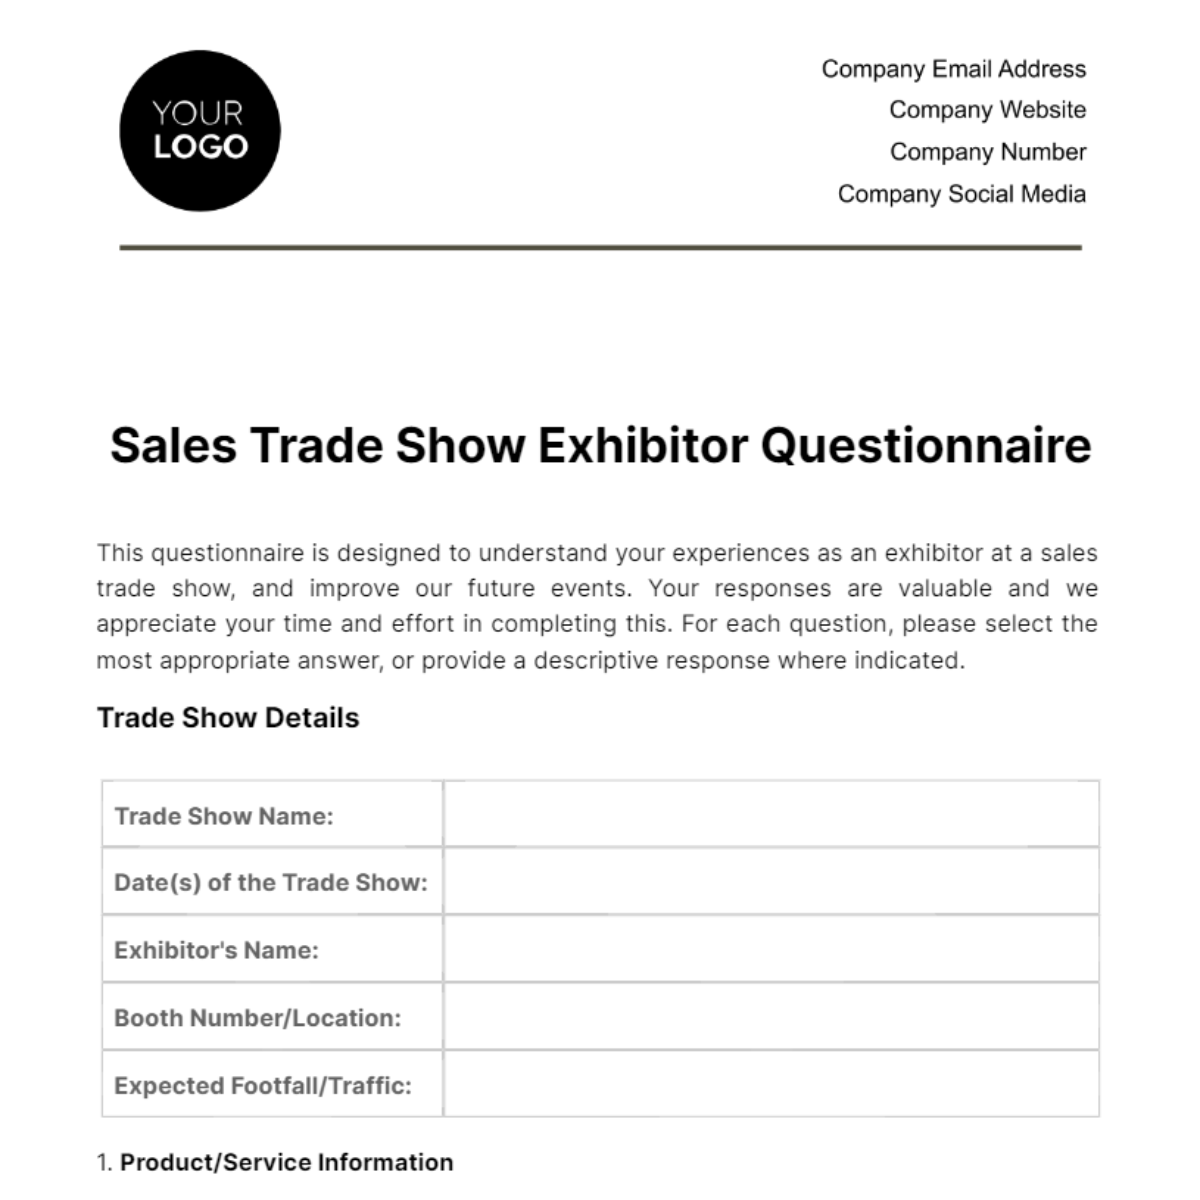 Free Sales Trade Show Exhibitor Questionnaire Template